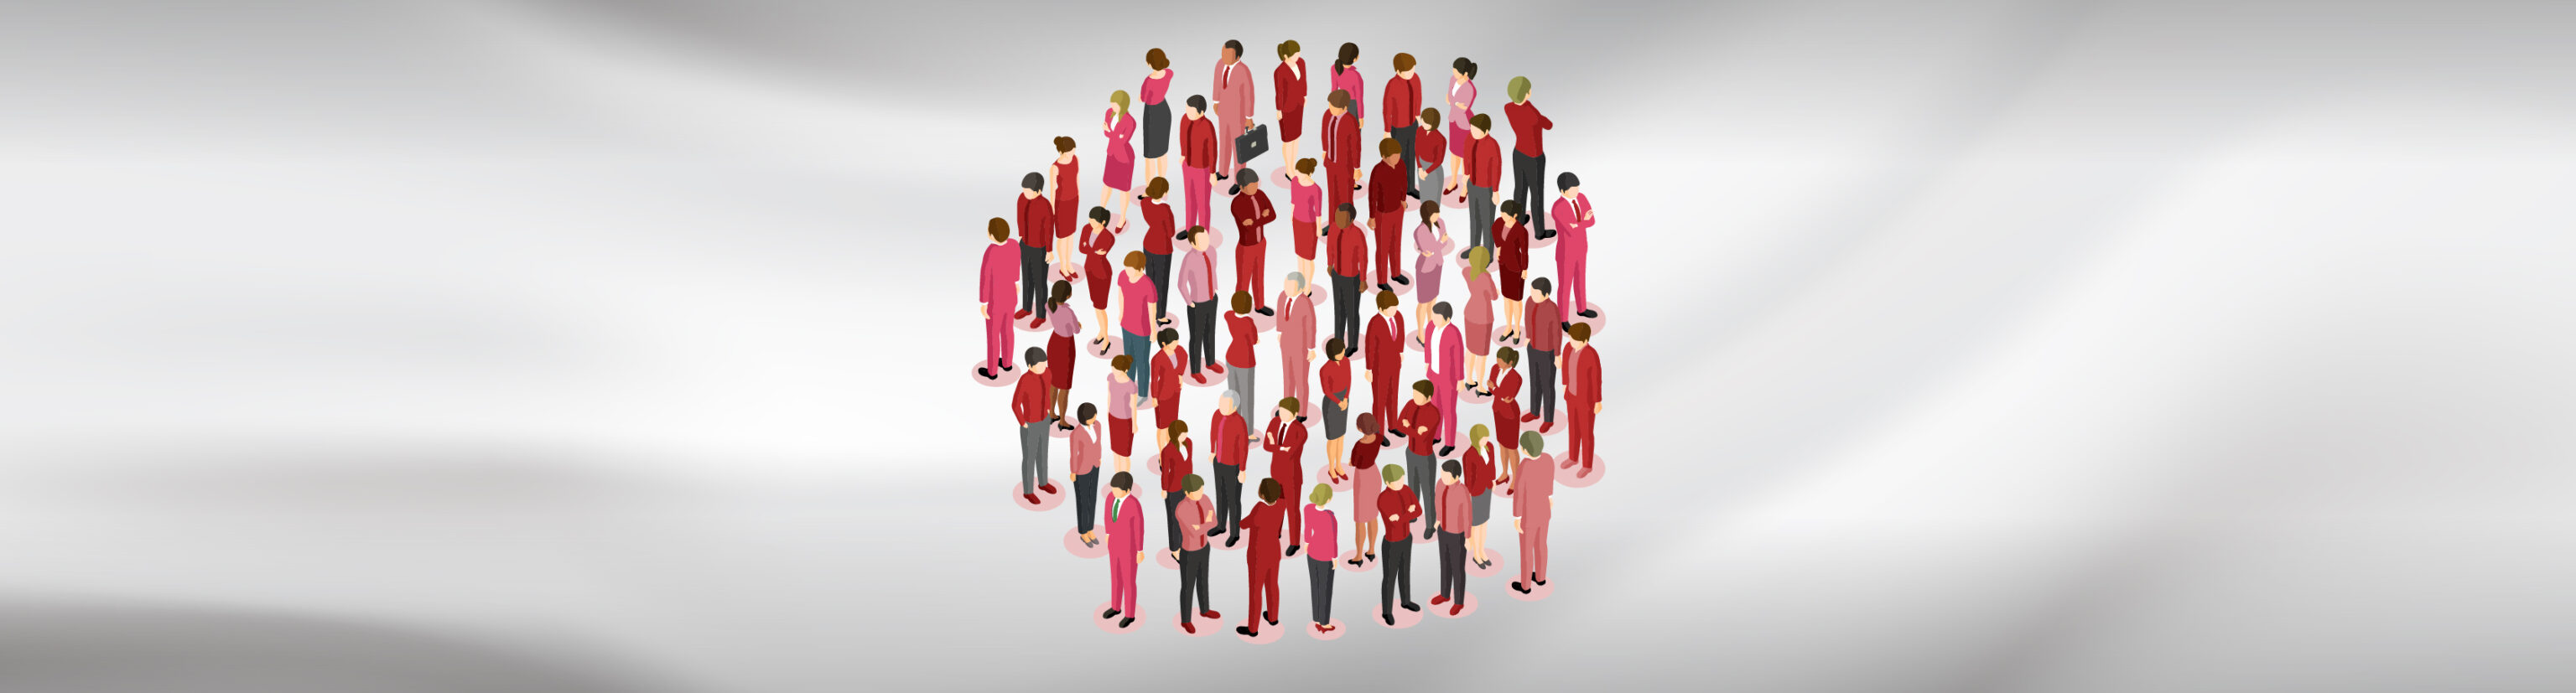 An infographic showing a group of people dressed in red, standing in a circle on a white background, representing the Japanese flag.